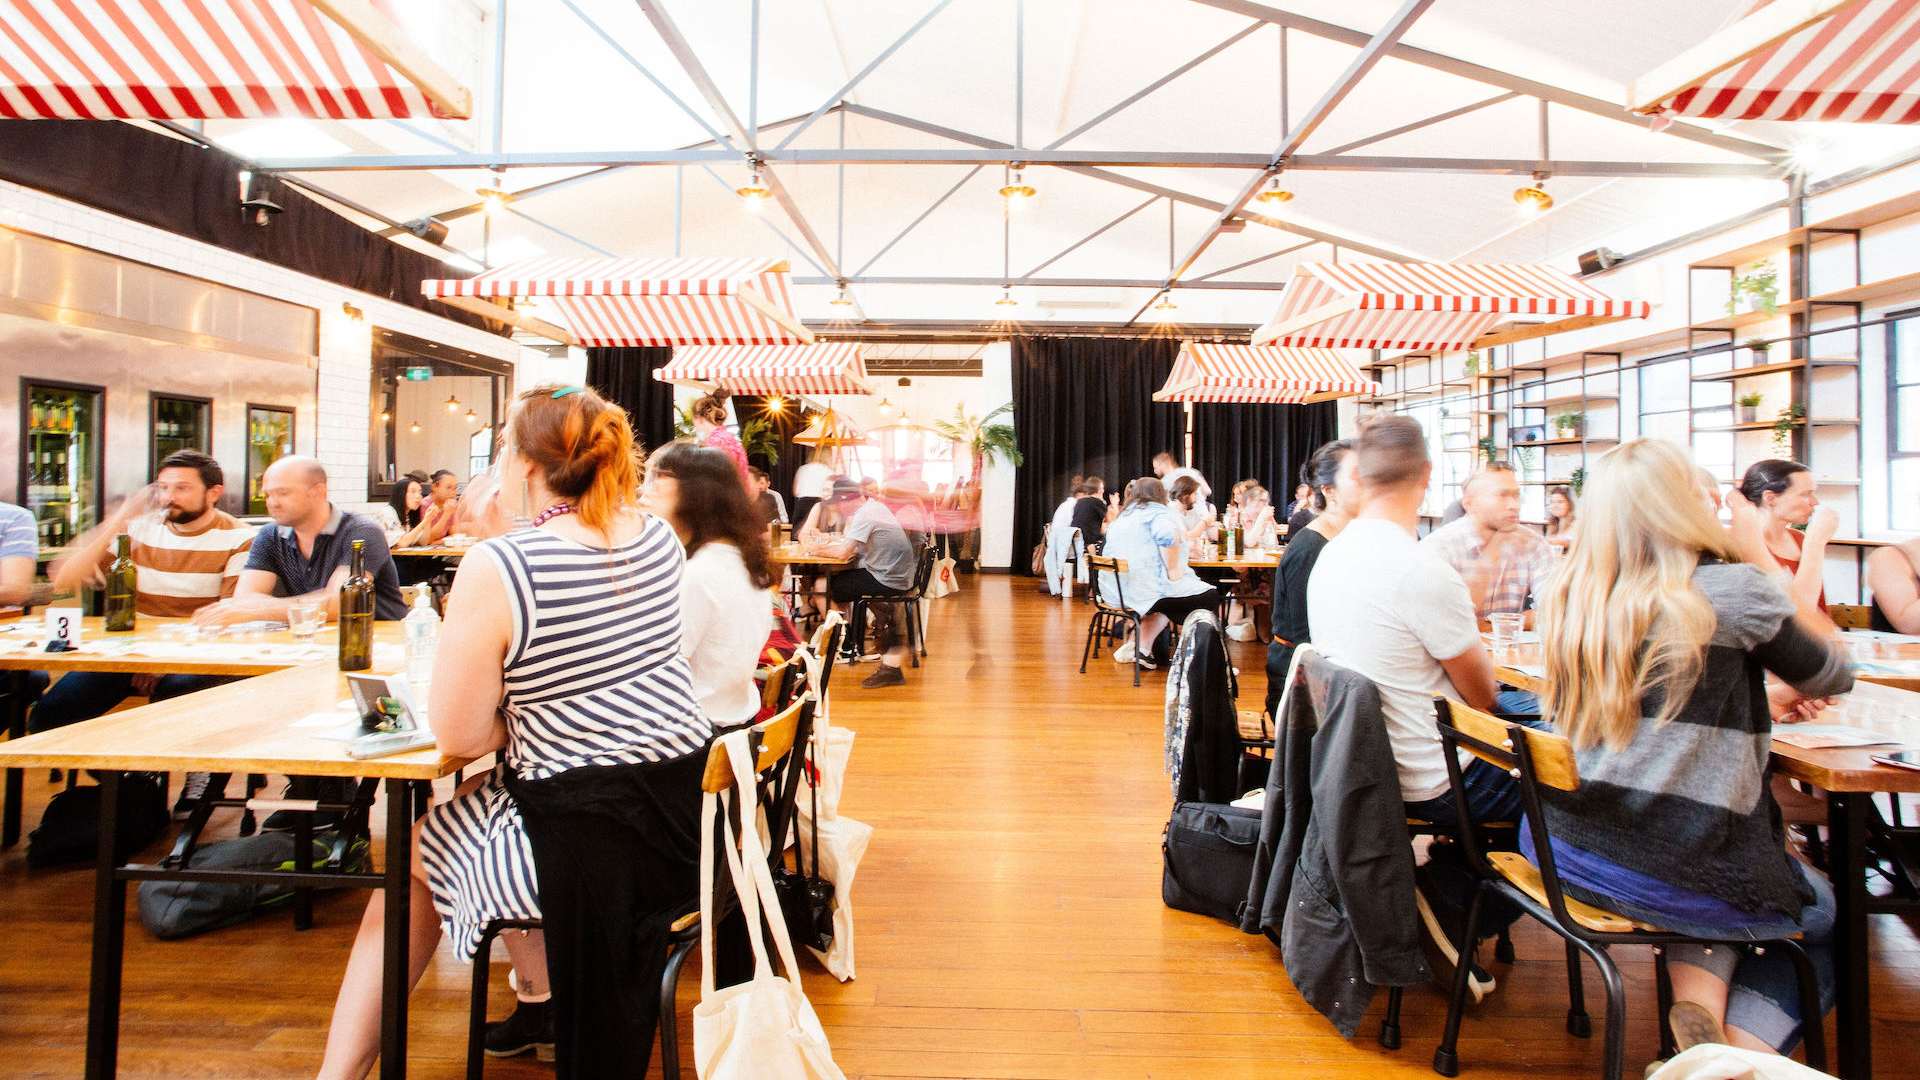 Autumn Gin Market at Craft & Co Collingwood